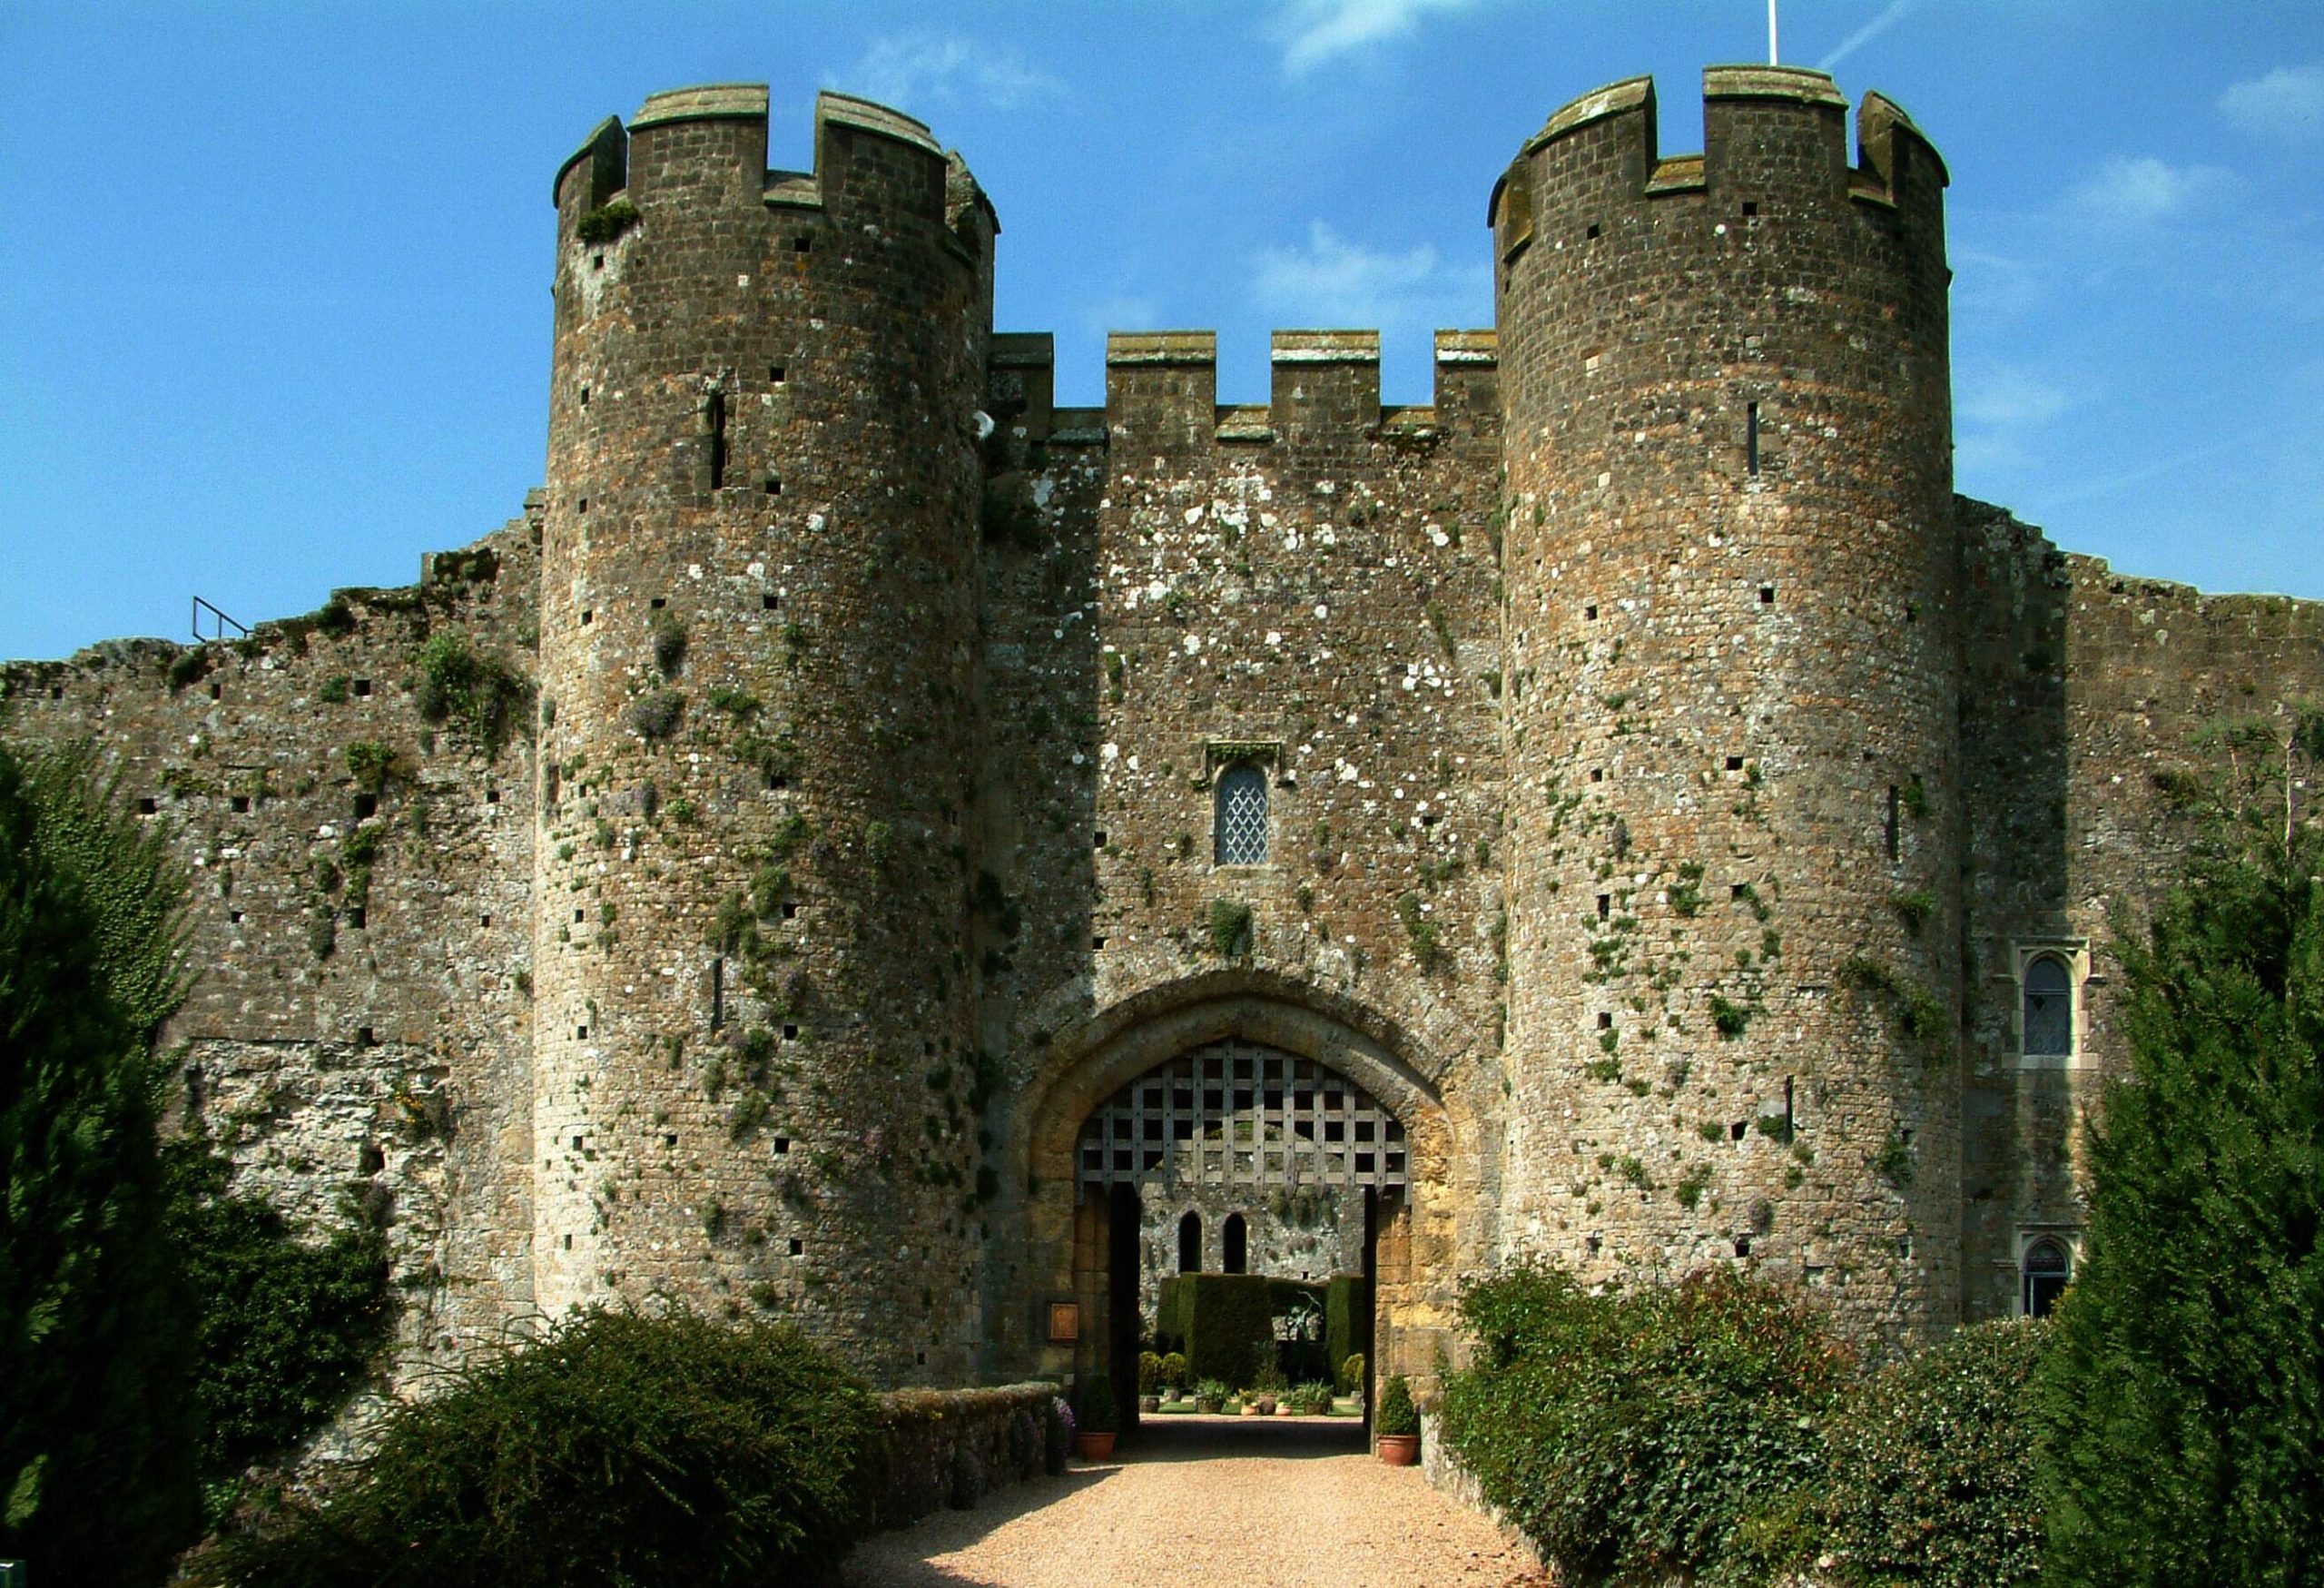 An entryway to an old castle with a portcullis and two towers on either side, all surrounded by bushes. 